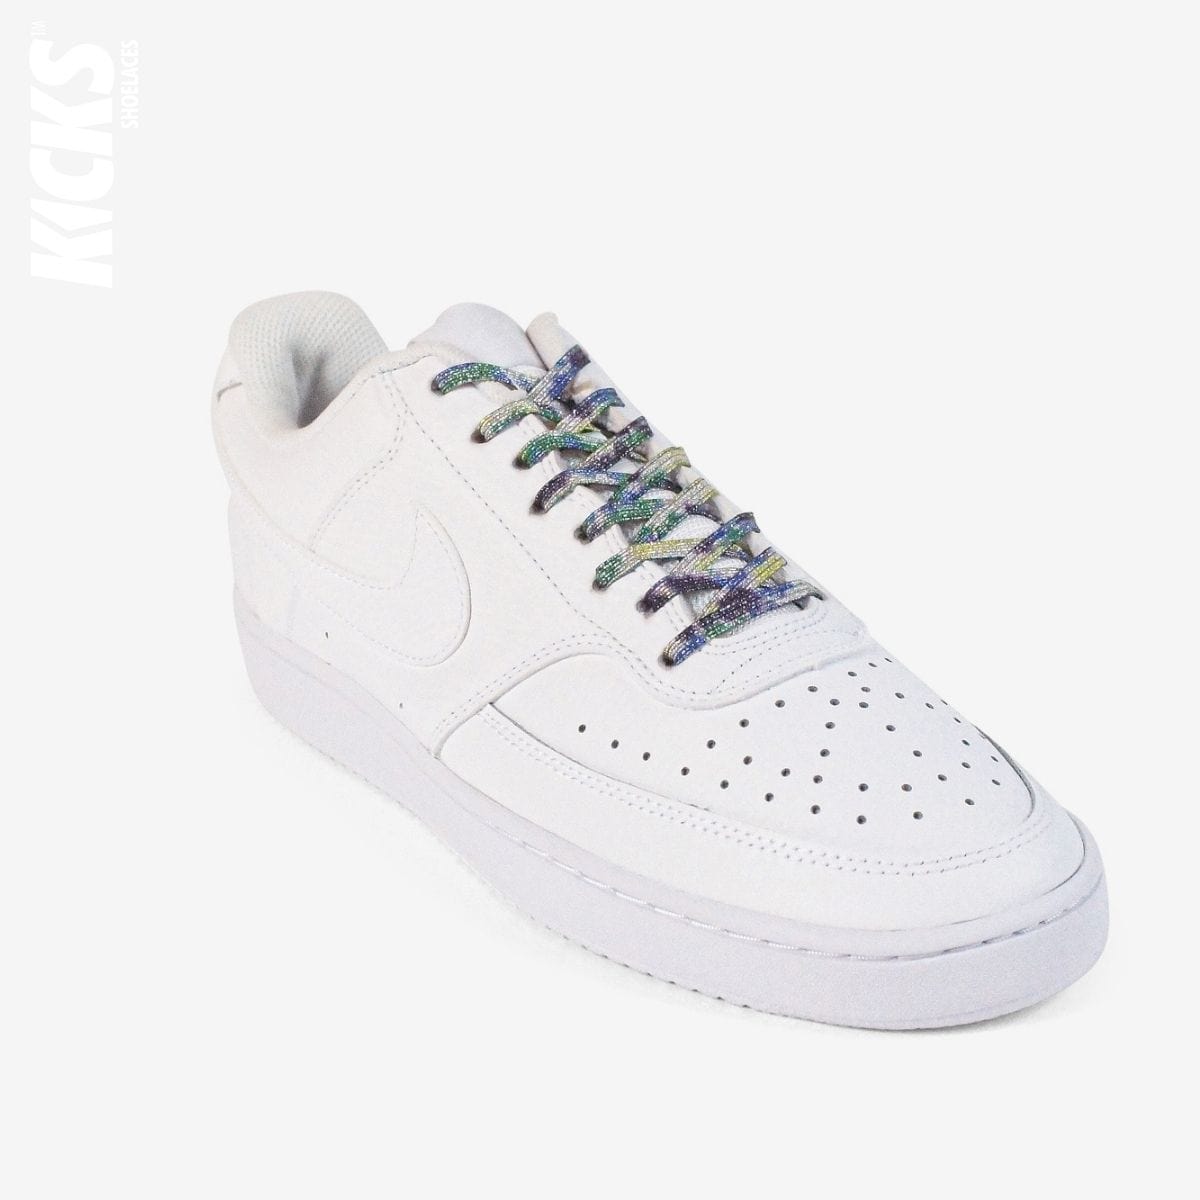 elastic-no-tie-shoelaces-with-ink-splash-laces-on-nike-white-sneakers